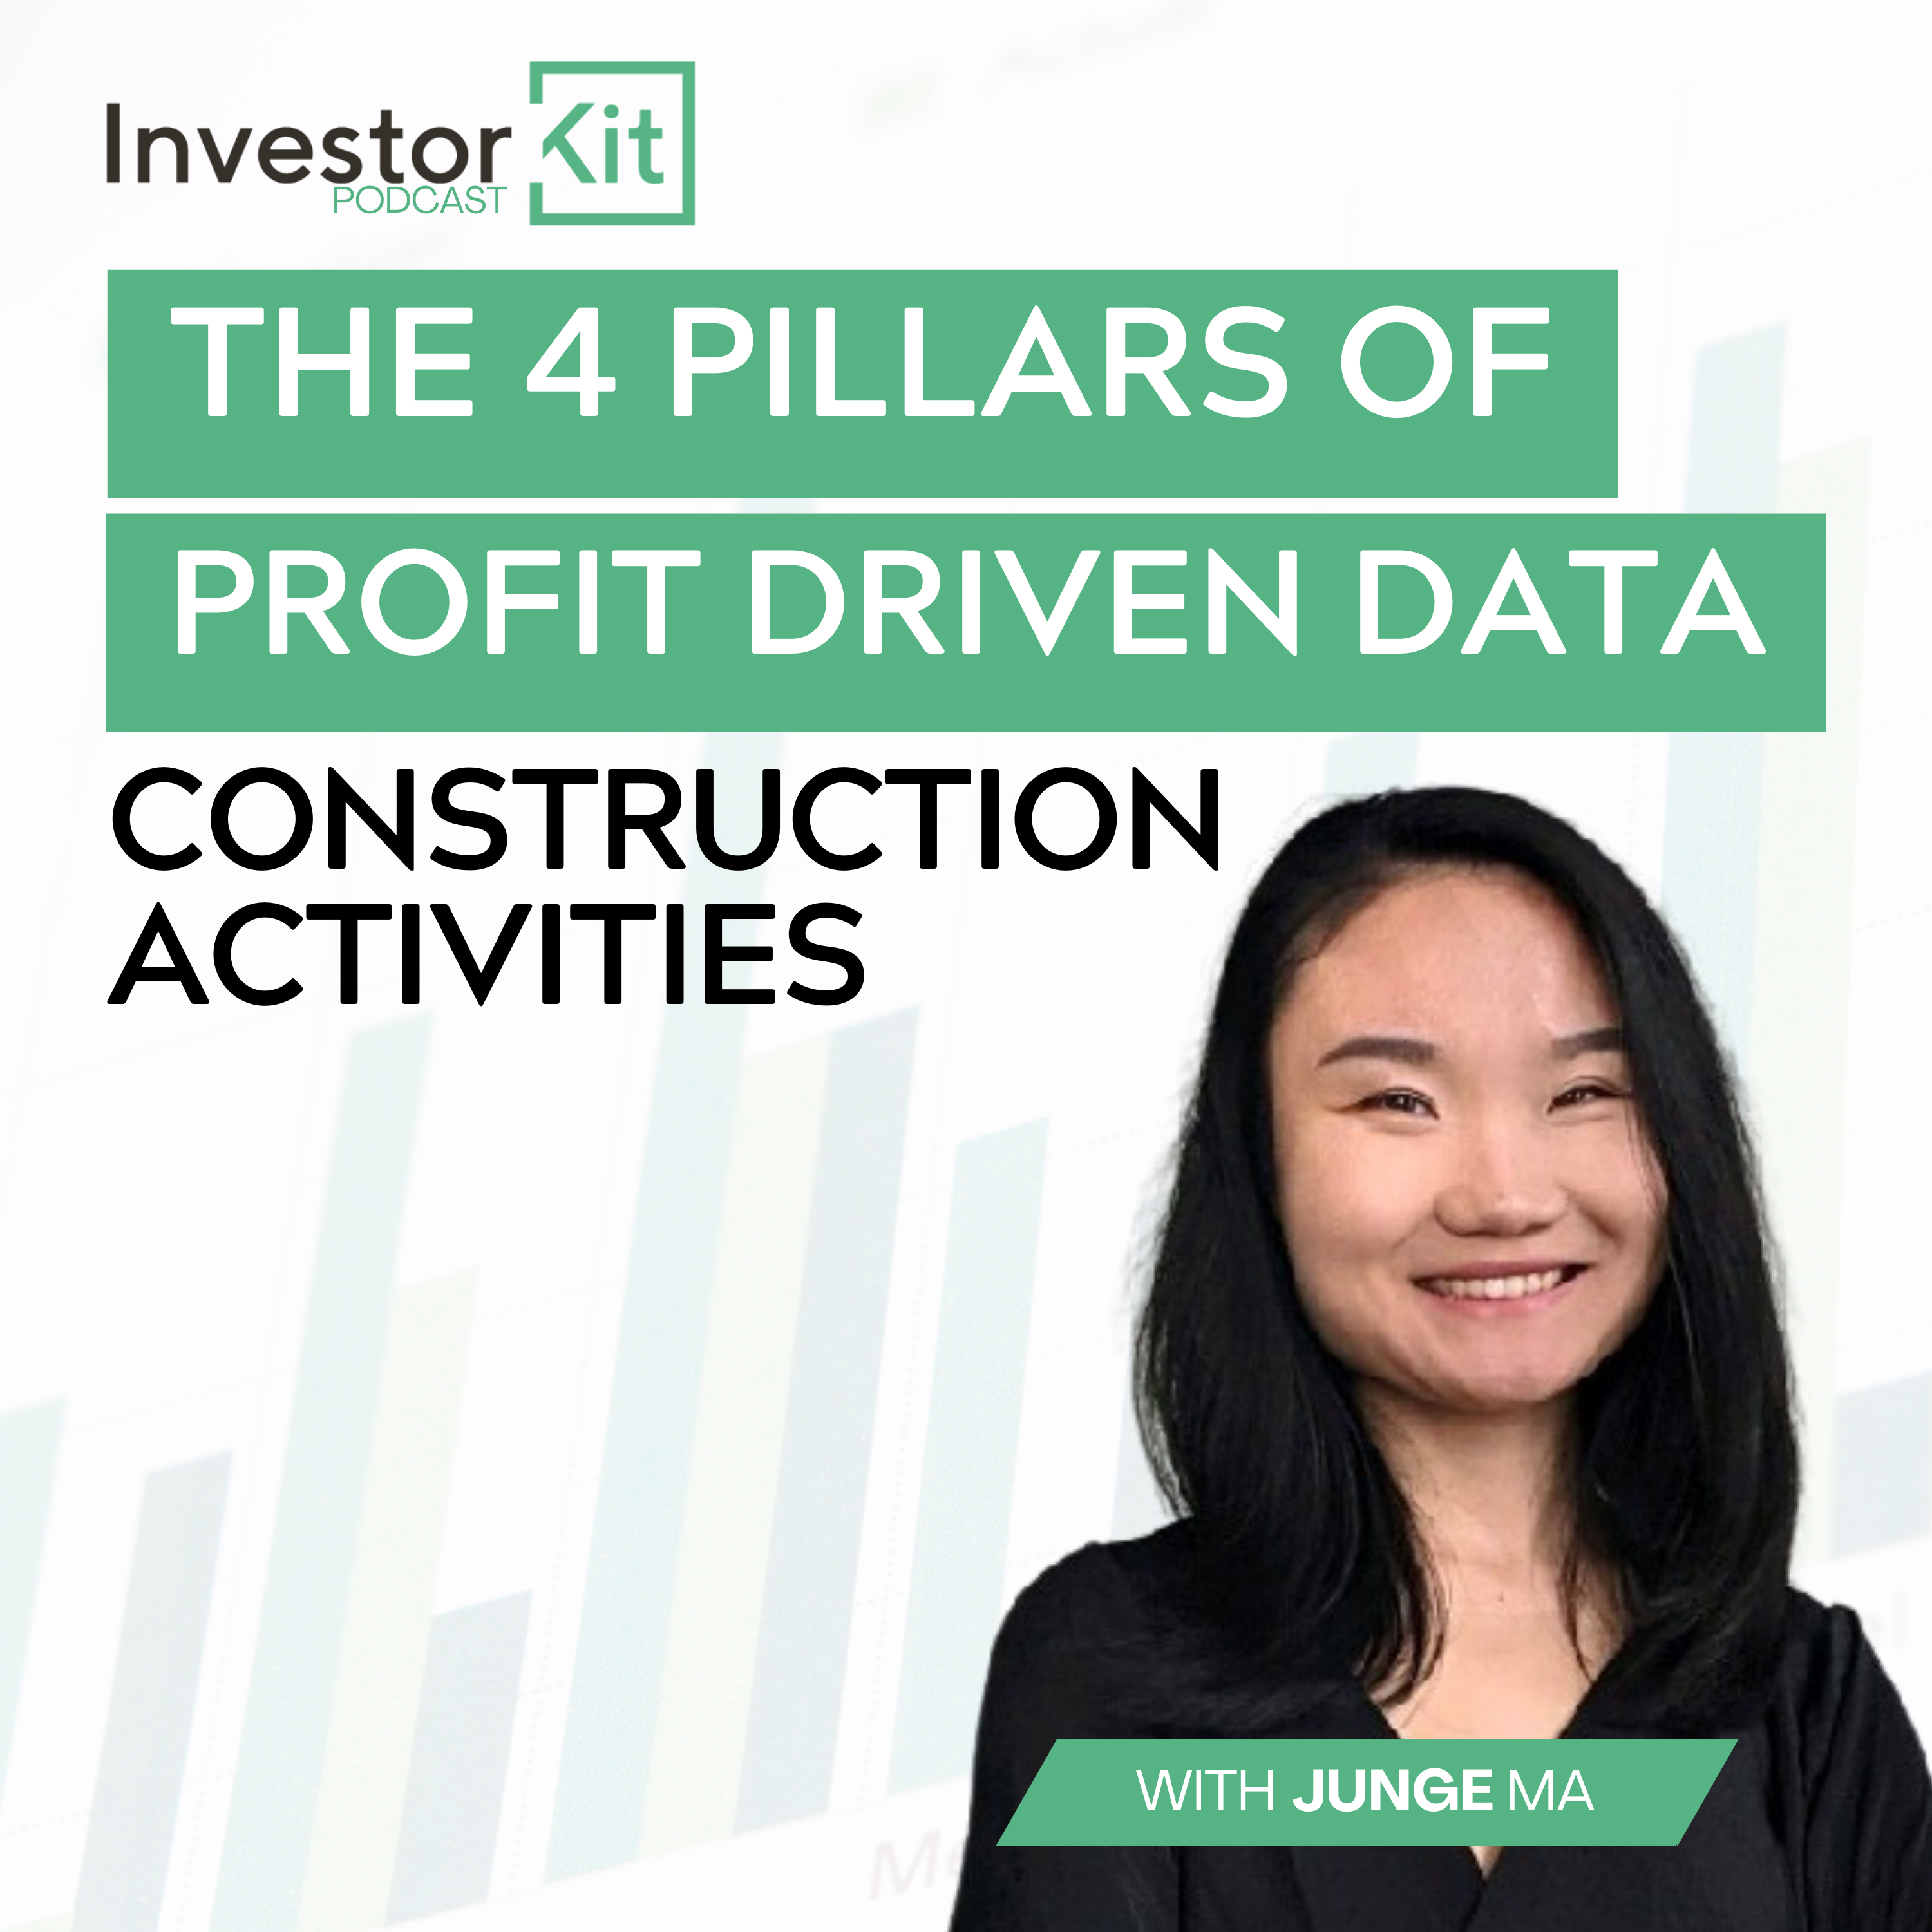 The 4 Pillars of Profit-Driven Data! Construction Activities - With Junge Ma